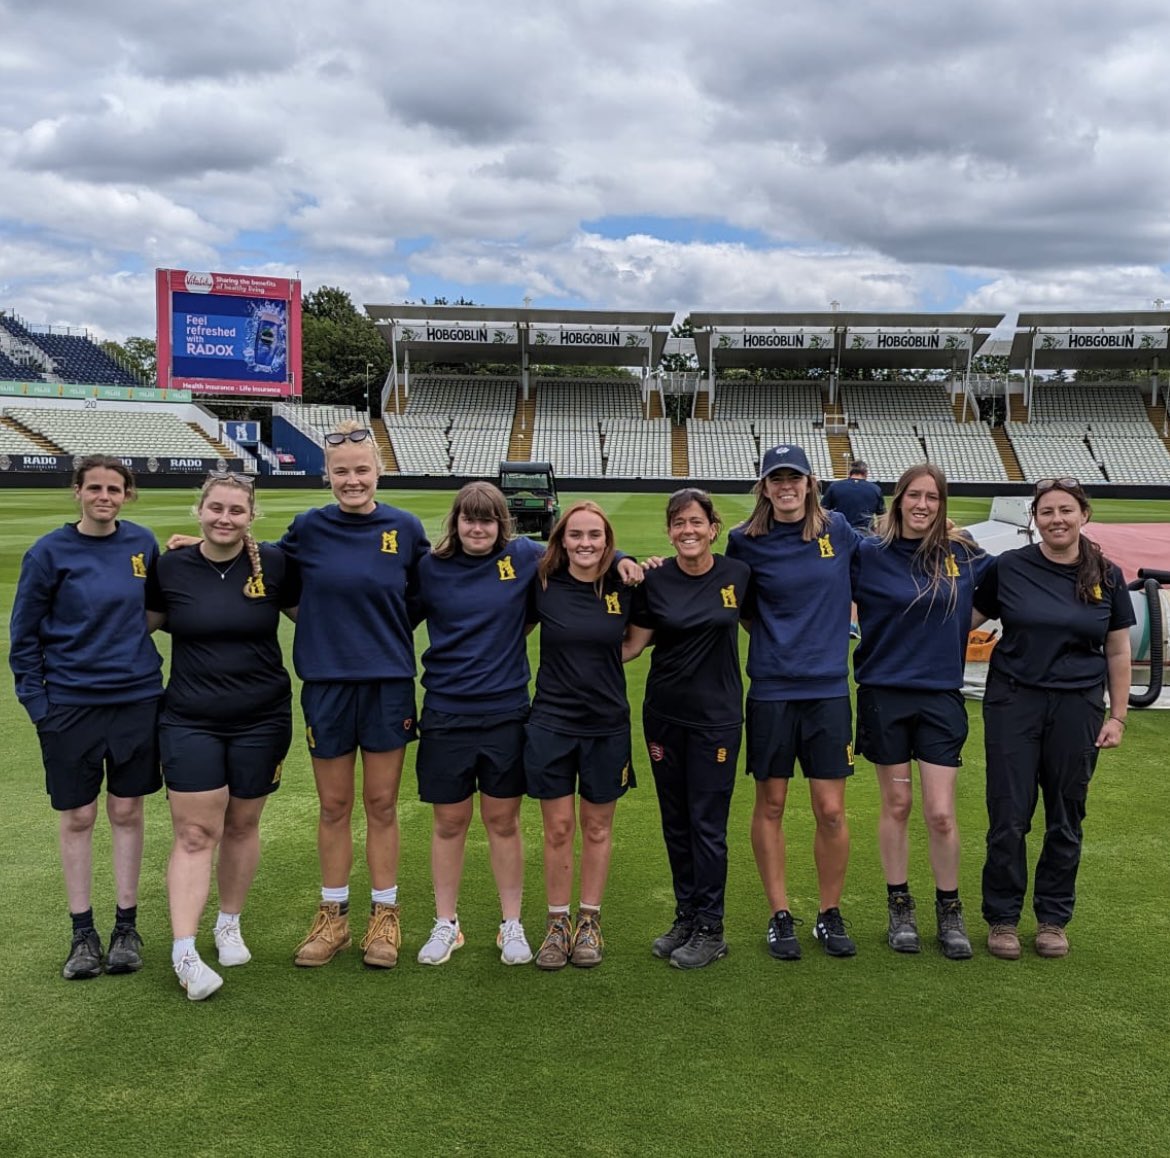 #GroundsWeek The world’s first all women’s grounds team to produce an international cricket pitch. We didn’t know it at the time, but Tara in the middle there would soon lead the Women’s Super League first all women’s grounds team at the Emirates.